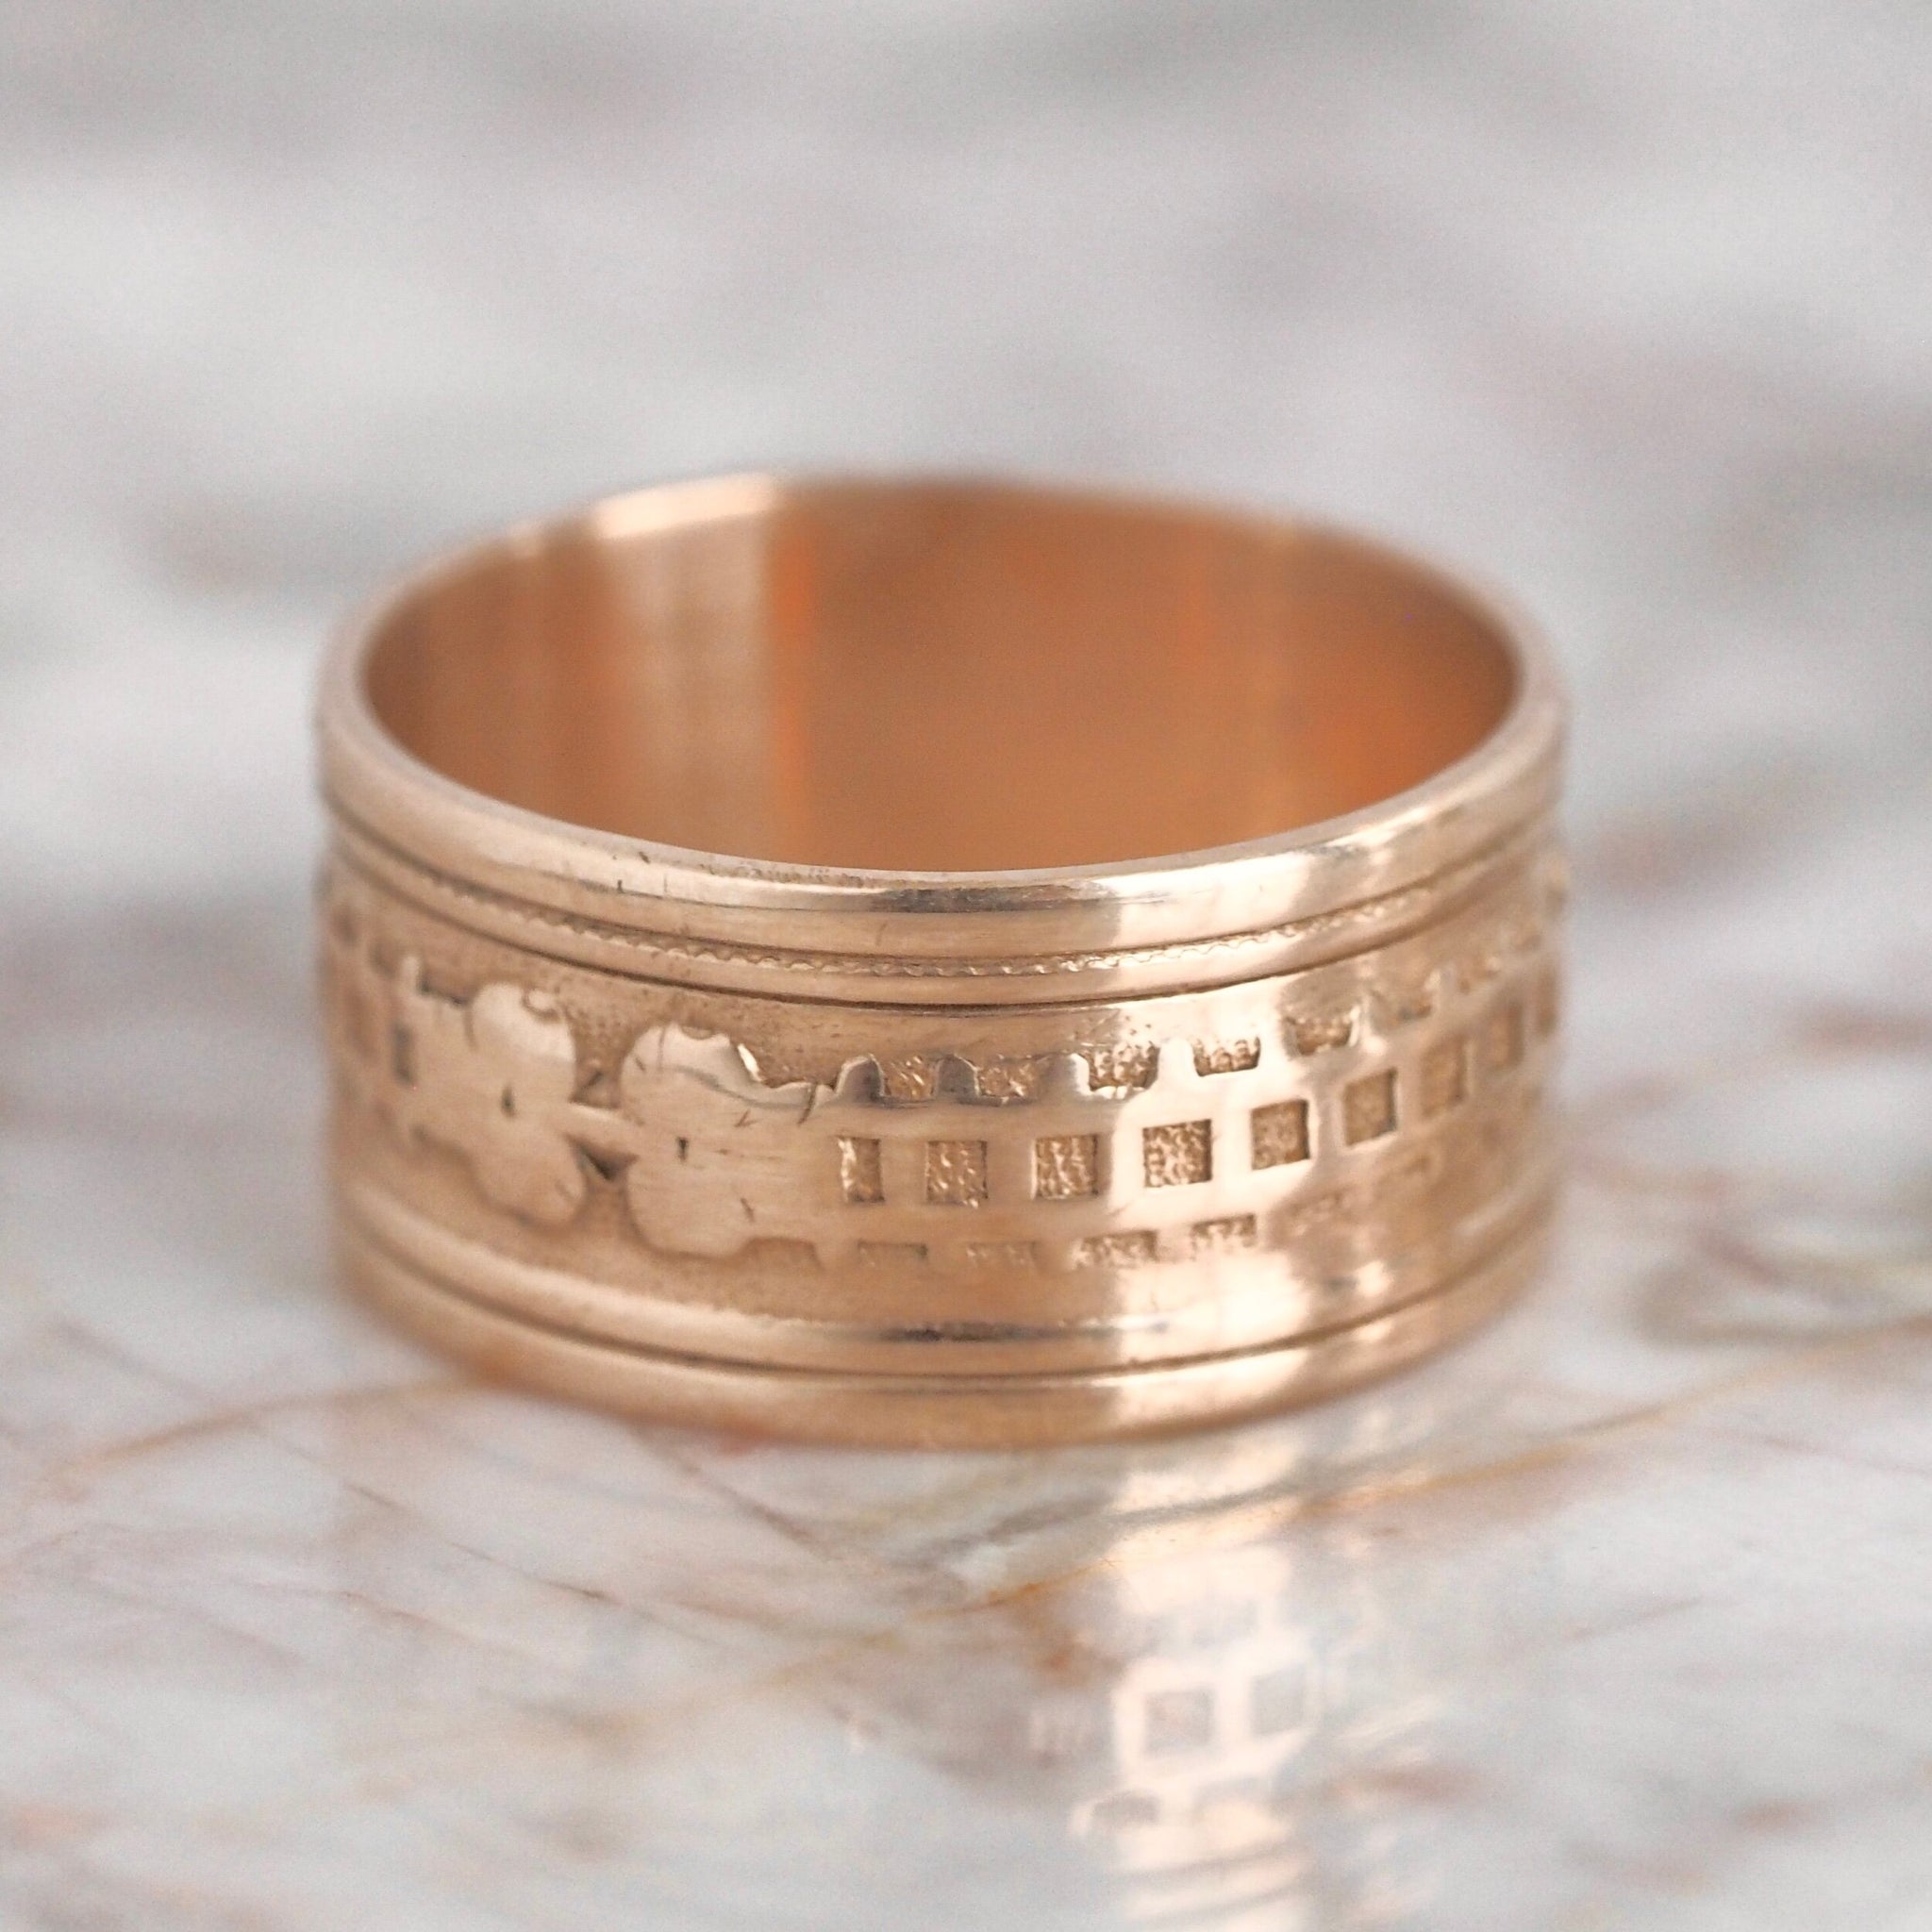 10KT Yellow Gold + White Rhodium The Last Supper Cigar Band Ring – LSJ